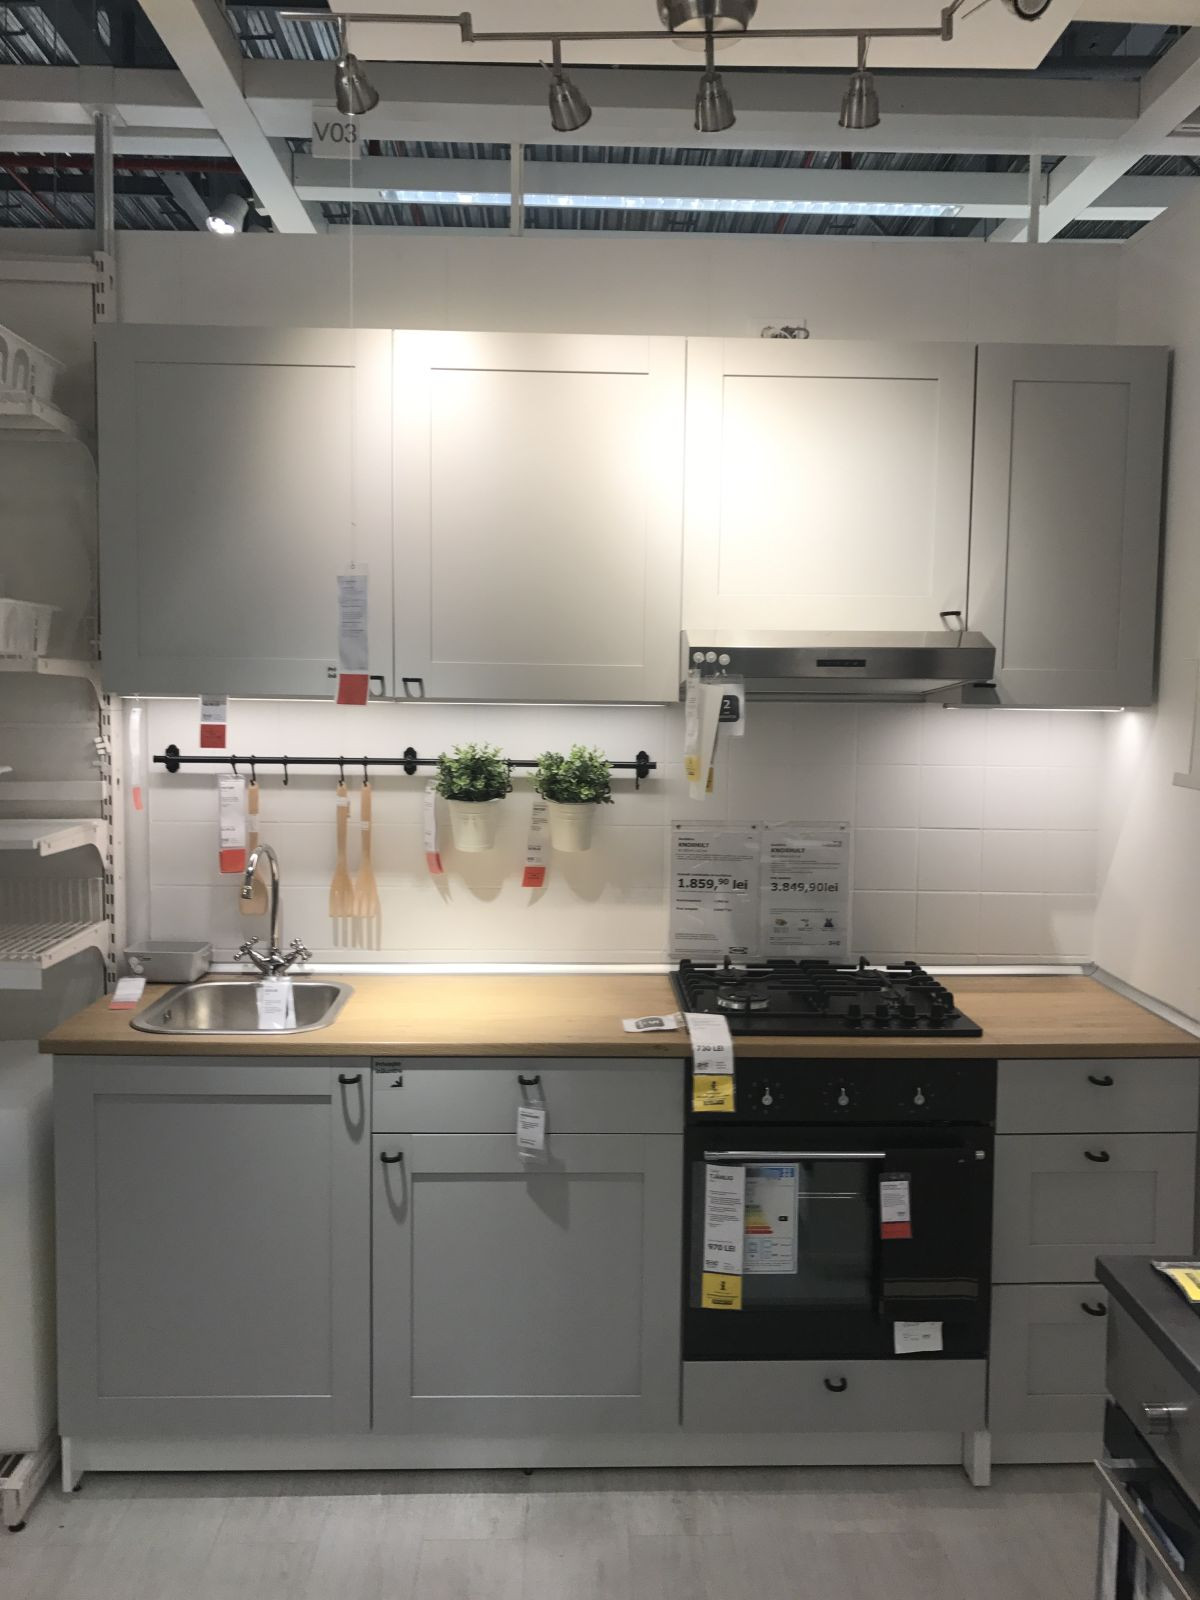 Small Ikea Kitchen
 Create a Stylish Space Starting With an IKEA Kitchen Design